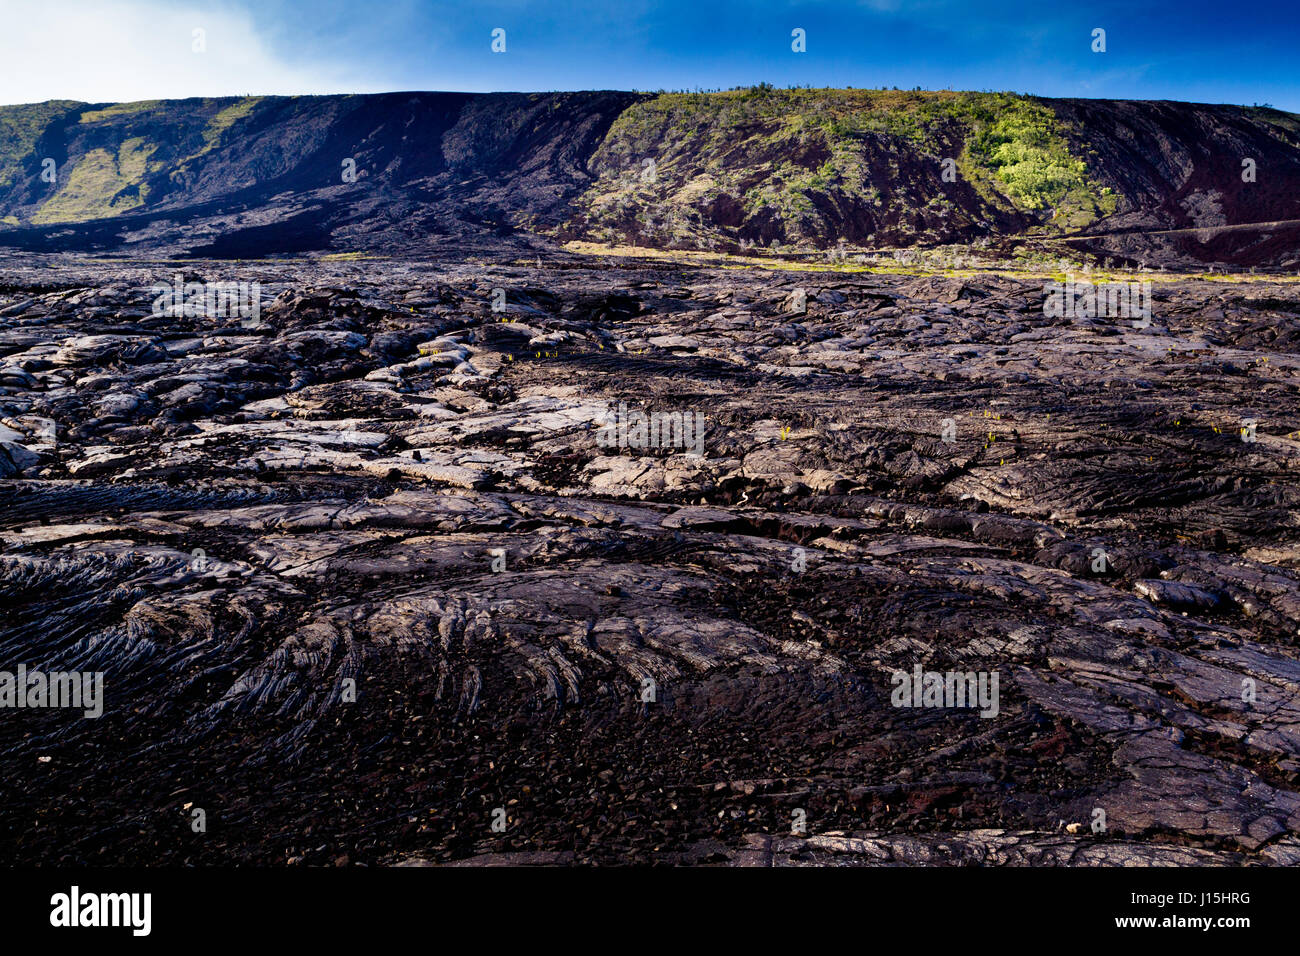 Volcanic Landscape with solidified lava flows in the Hawaii Volcanoes National Park on Big Island, Hawaii, USA. Stock Photo